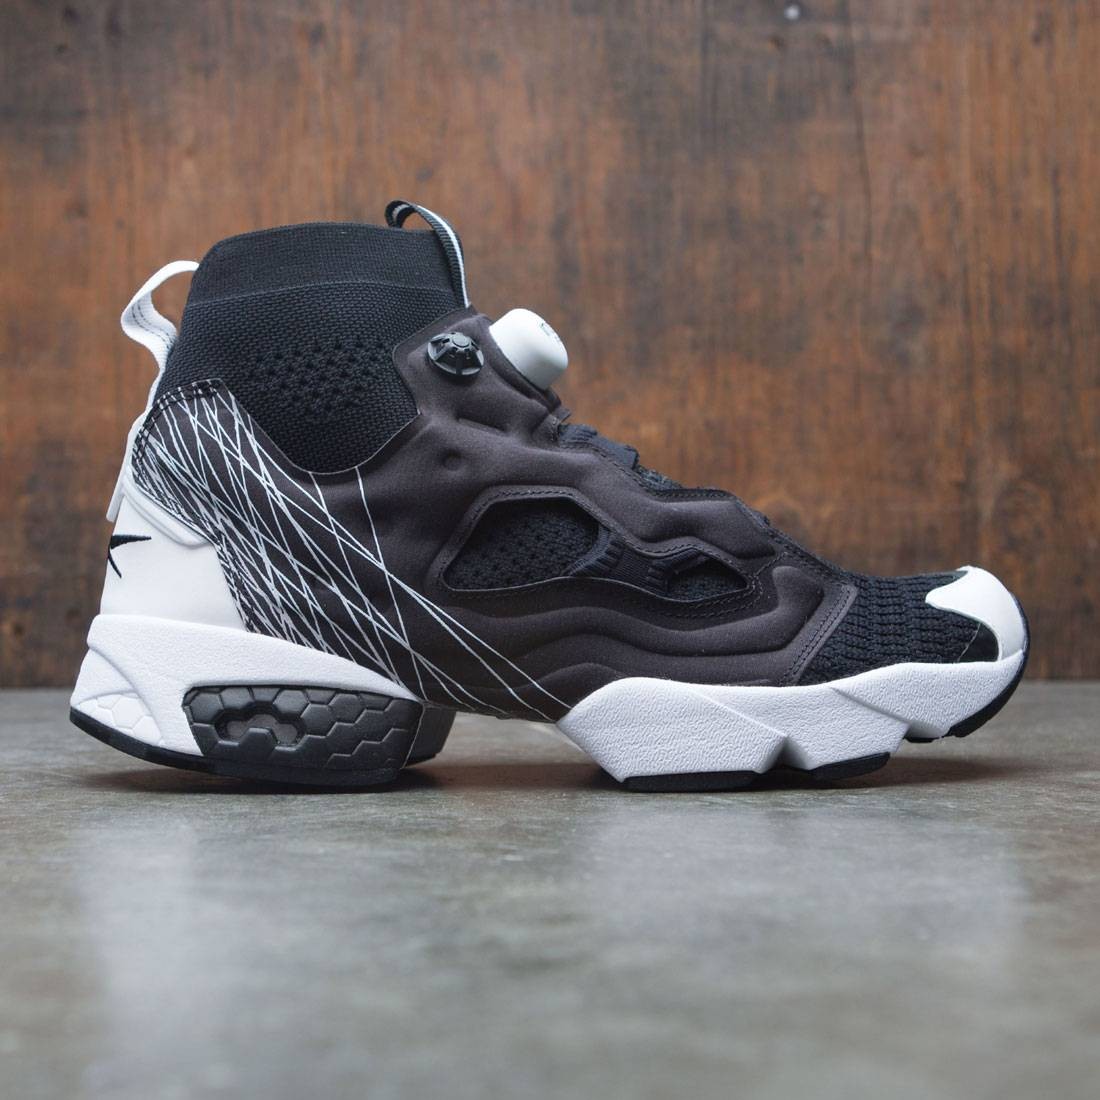 The Reebok InstaPump Fury OG Ultraknit Gets Two New Colorways, But